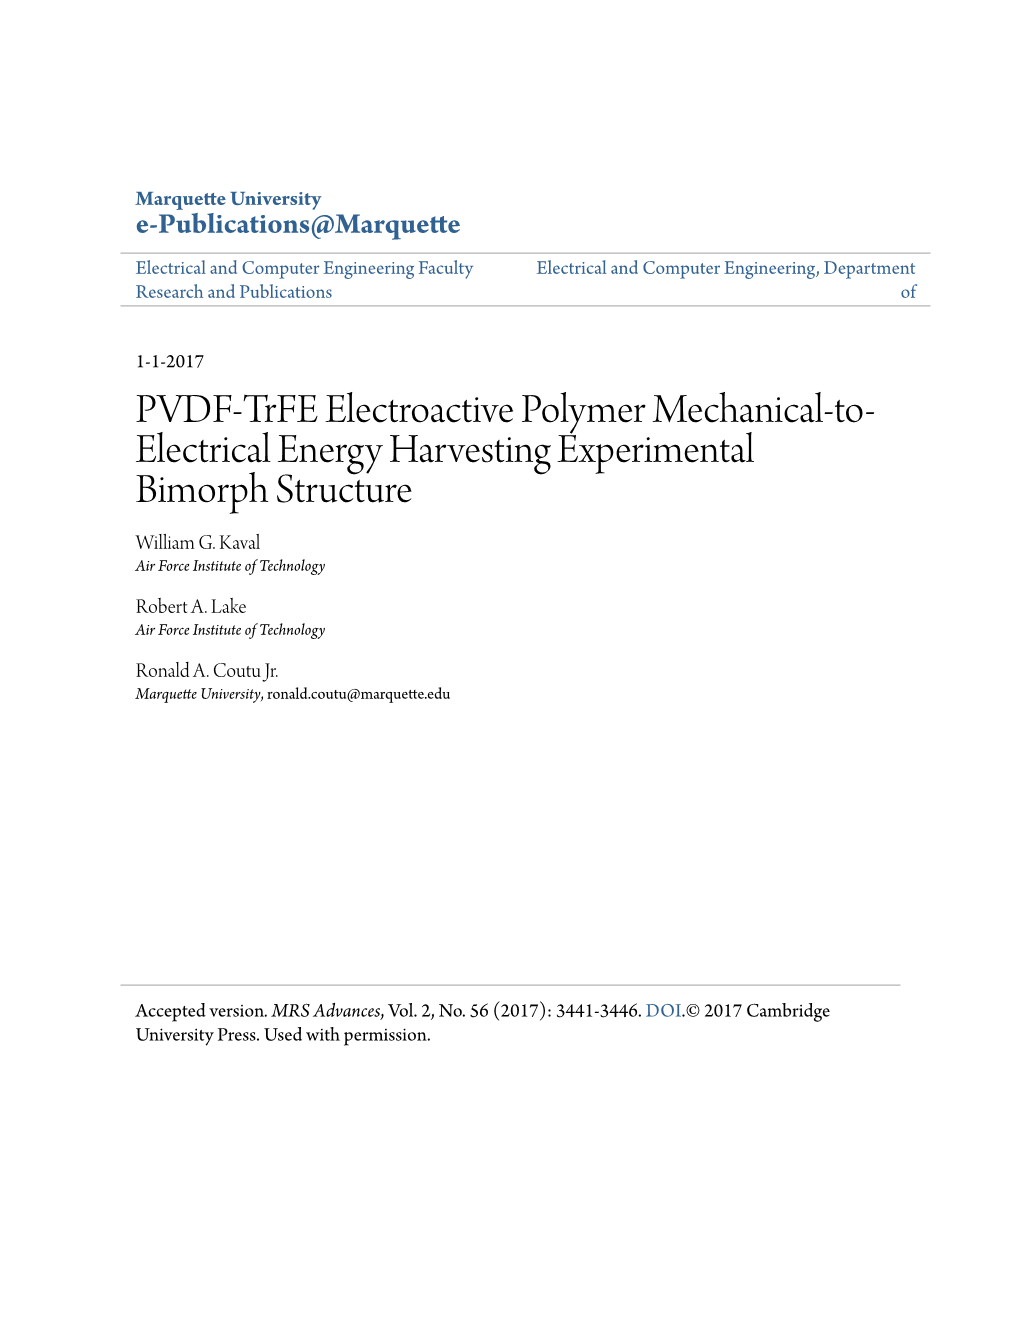 PVDF-Trfe Electroactive Polymer Mechanical-To-Electrical Energy Harvesting Experimental Bimorph Structure